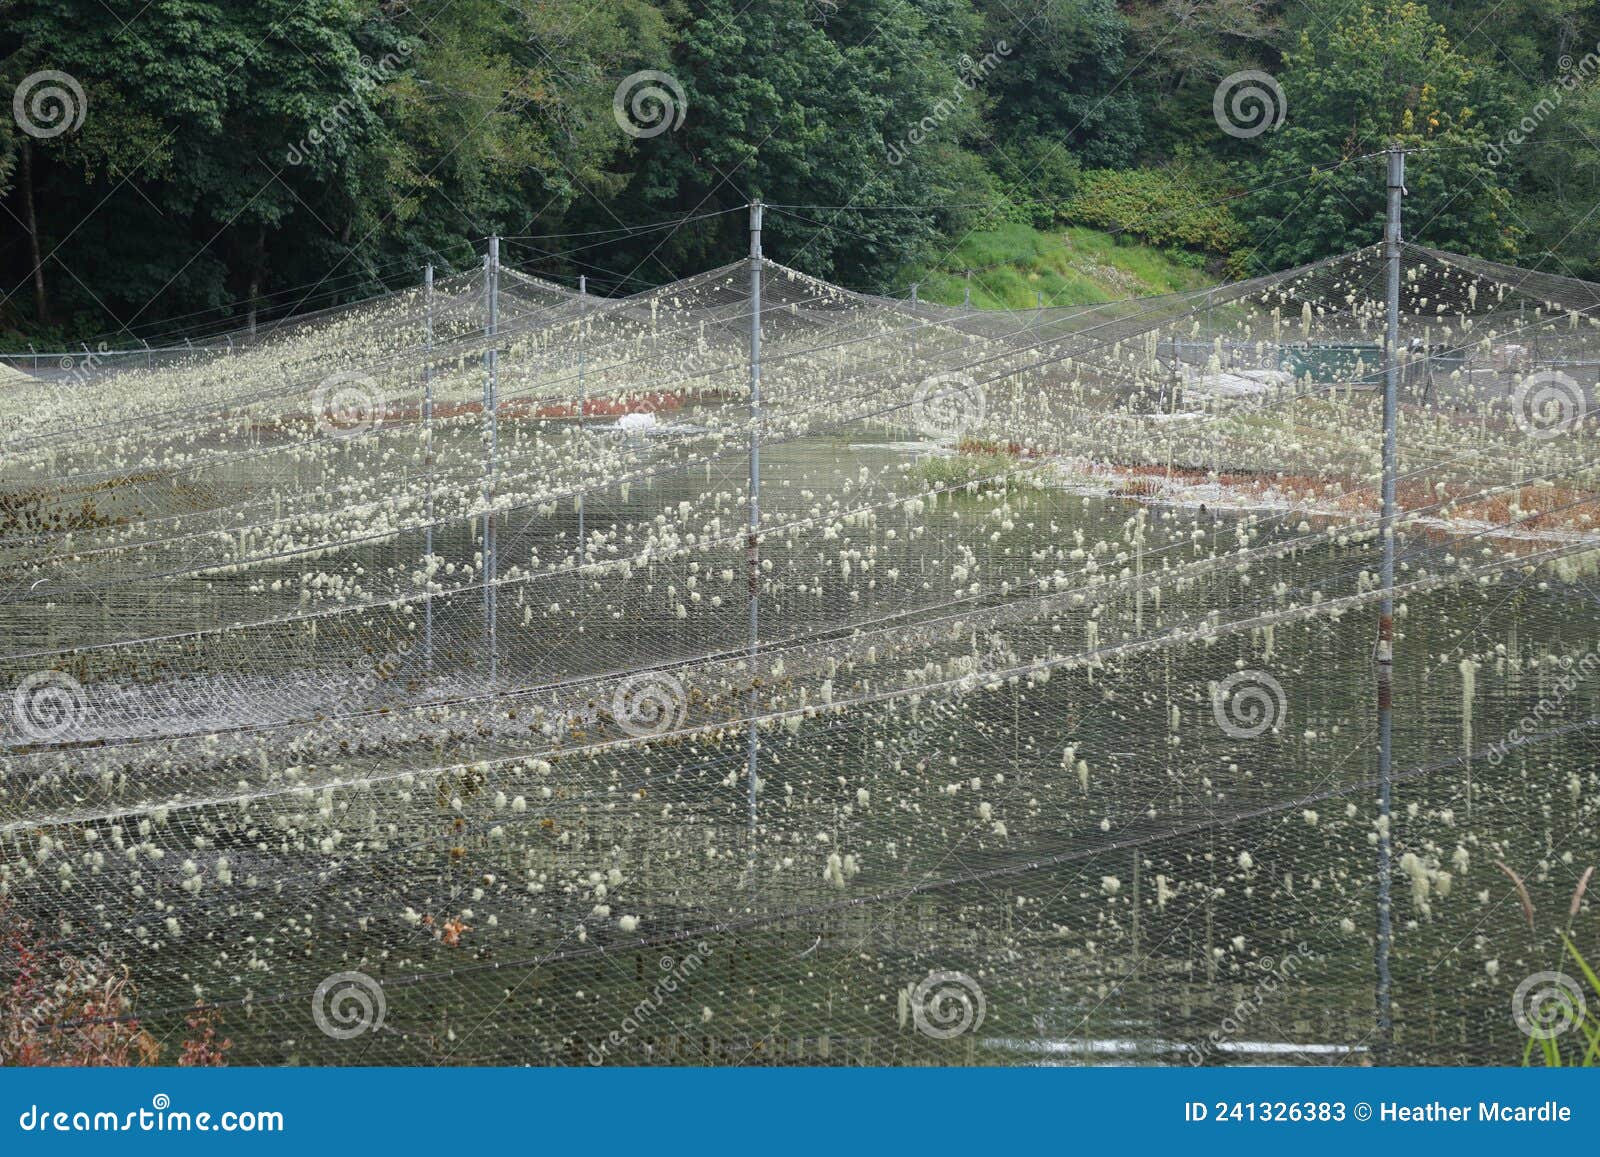 Lichen on Nets Covering the Fish Rearing Pond Stock Image - Image of jobs,  fish: 241326383